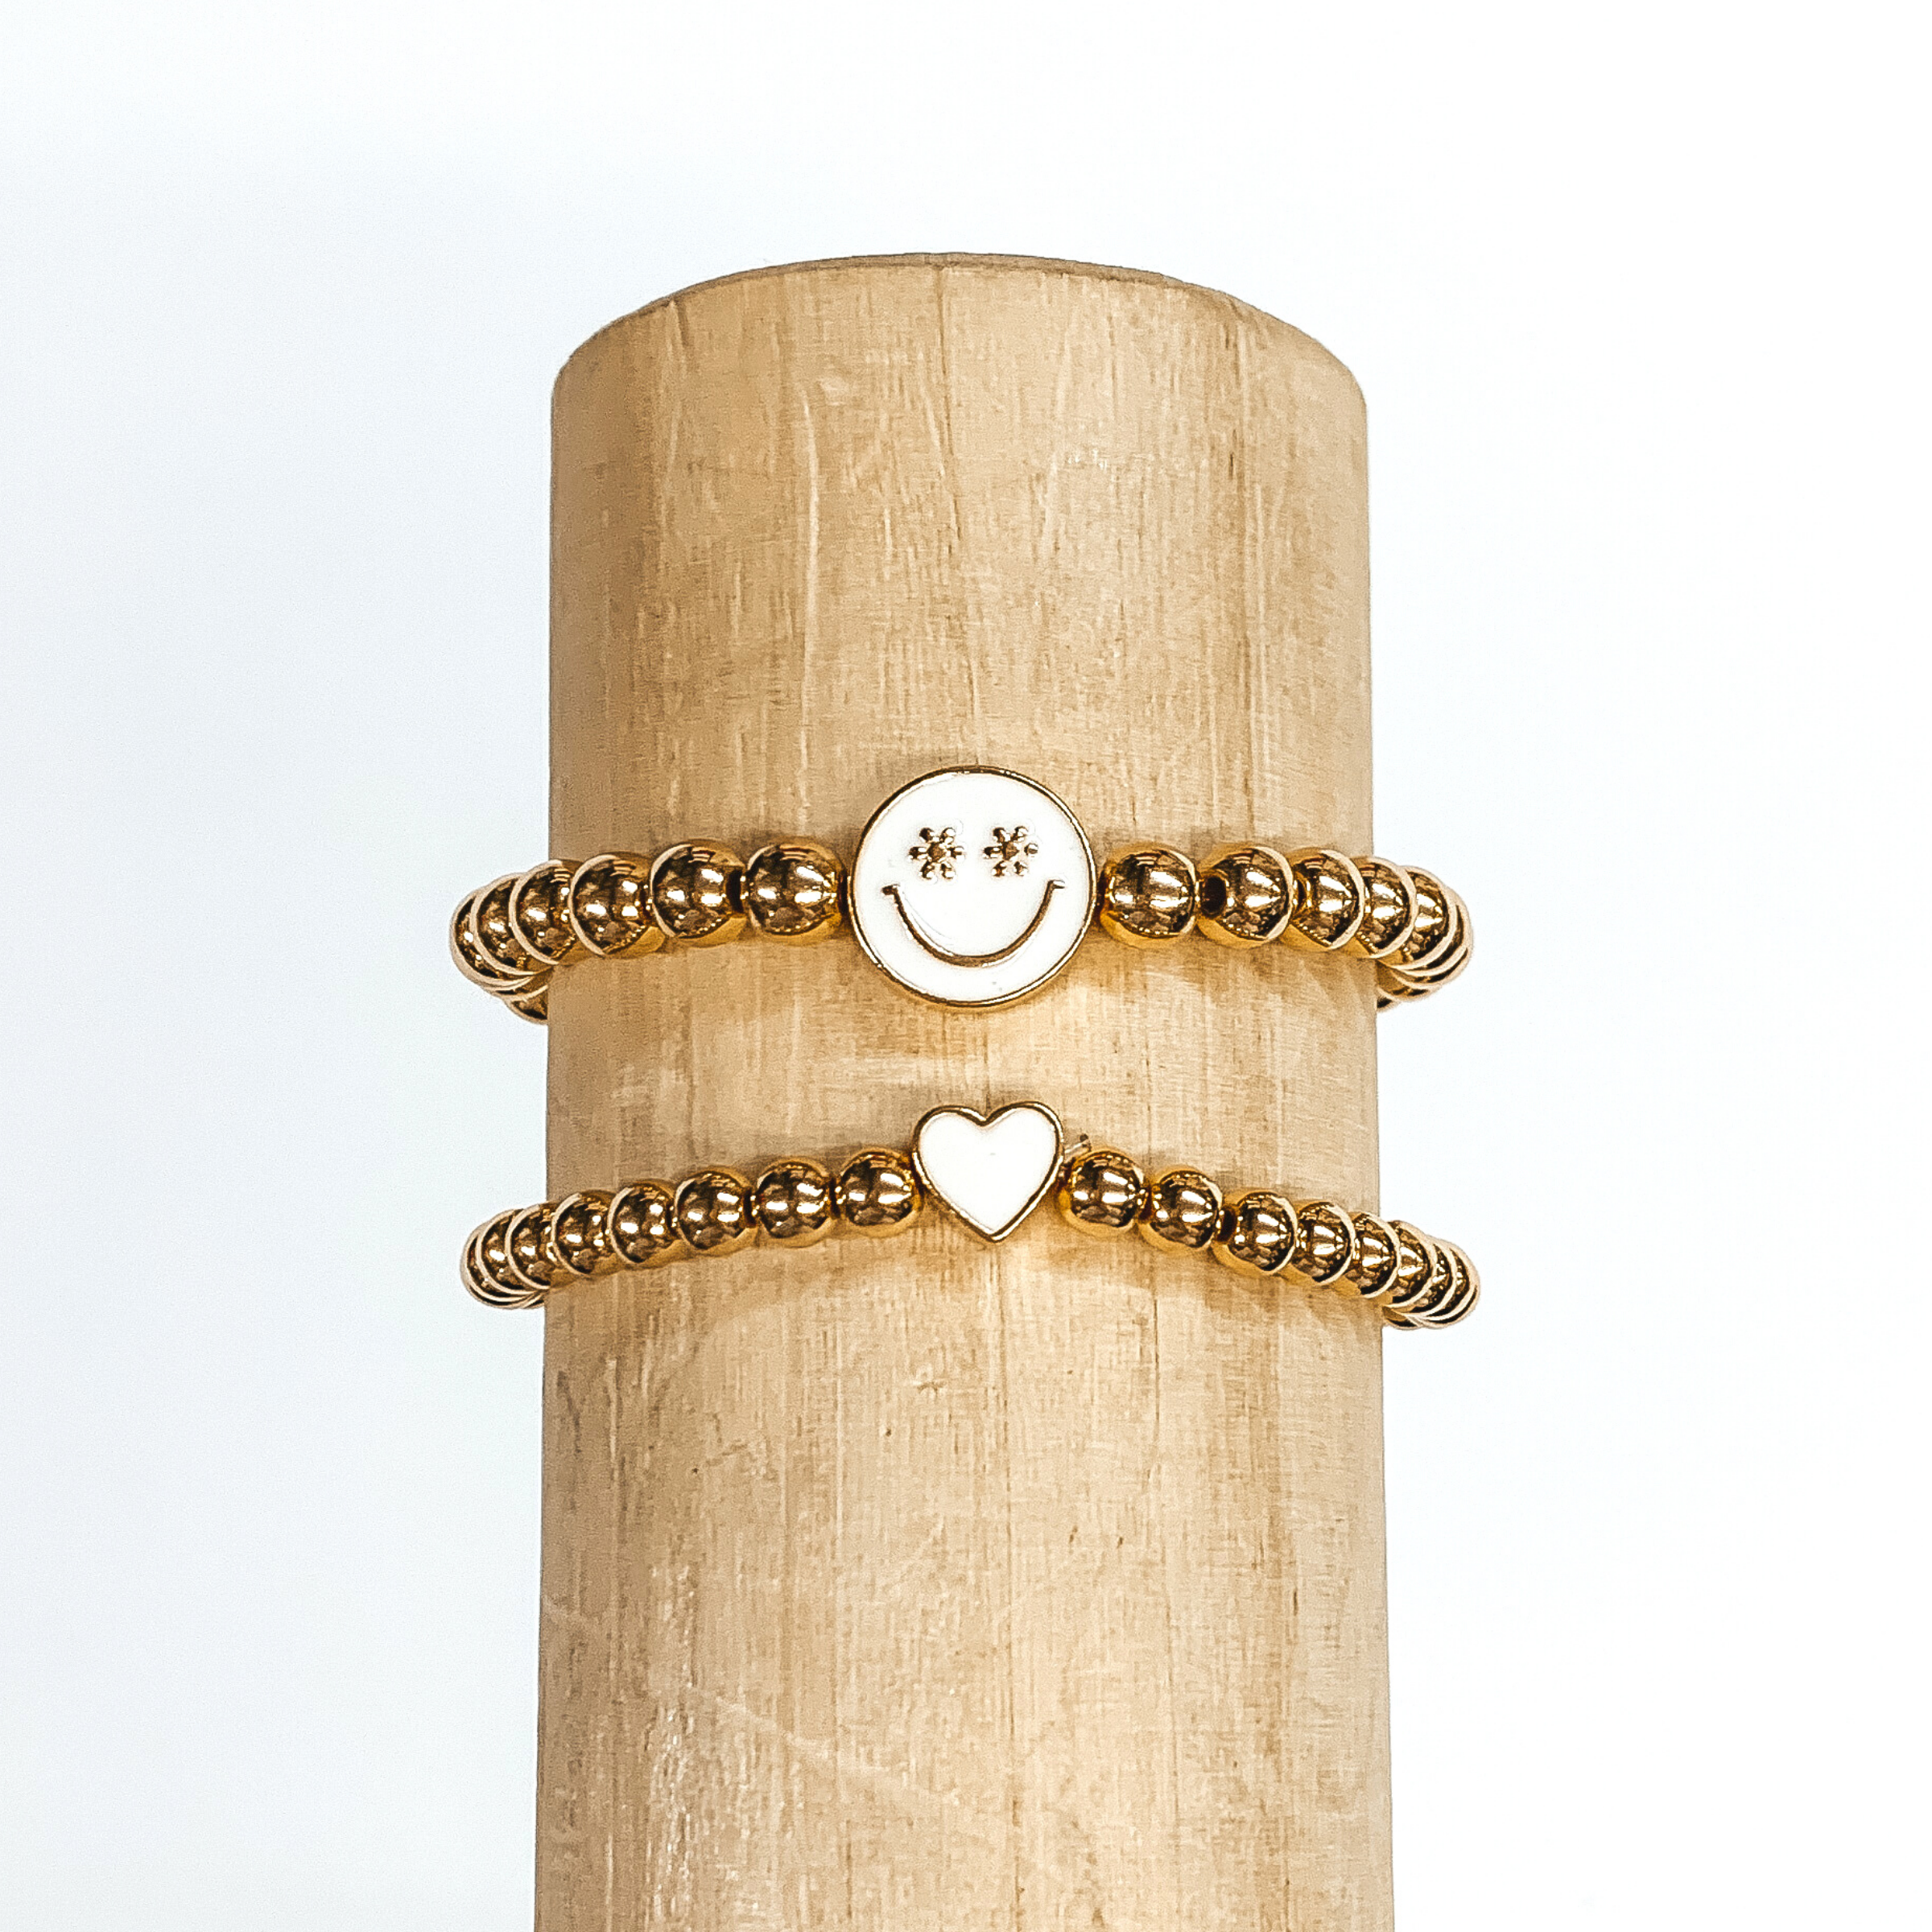 Two gold beaded bracelets. One bracelet has a tiny heart charm colored ivory. The other bracelet has a circle charm that is colored ivory with a smiley face in gold in the center. The eyes of the smiley face are tiny flowers. These two bracelets are pictured on a wood bracelet holder on a white background. 